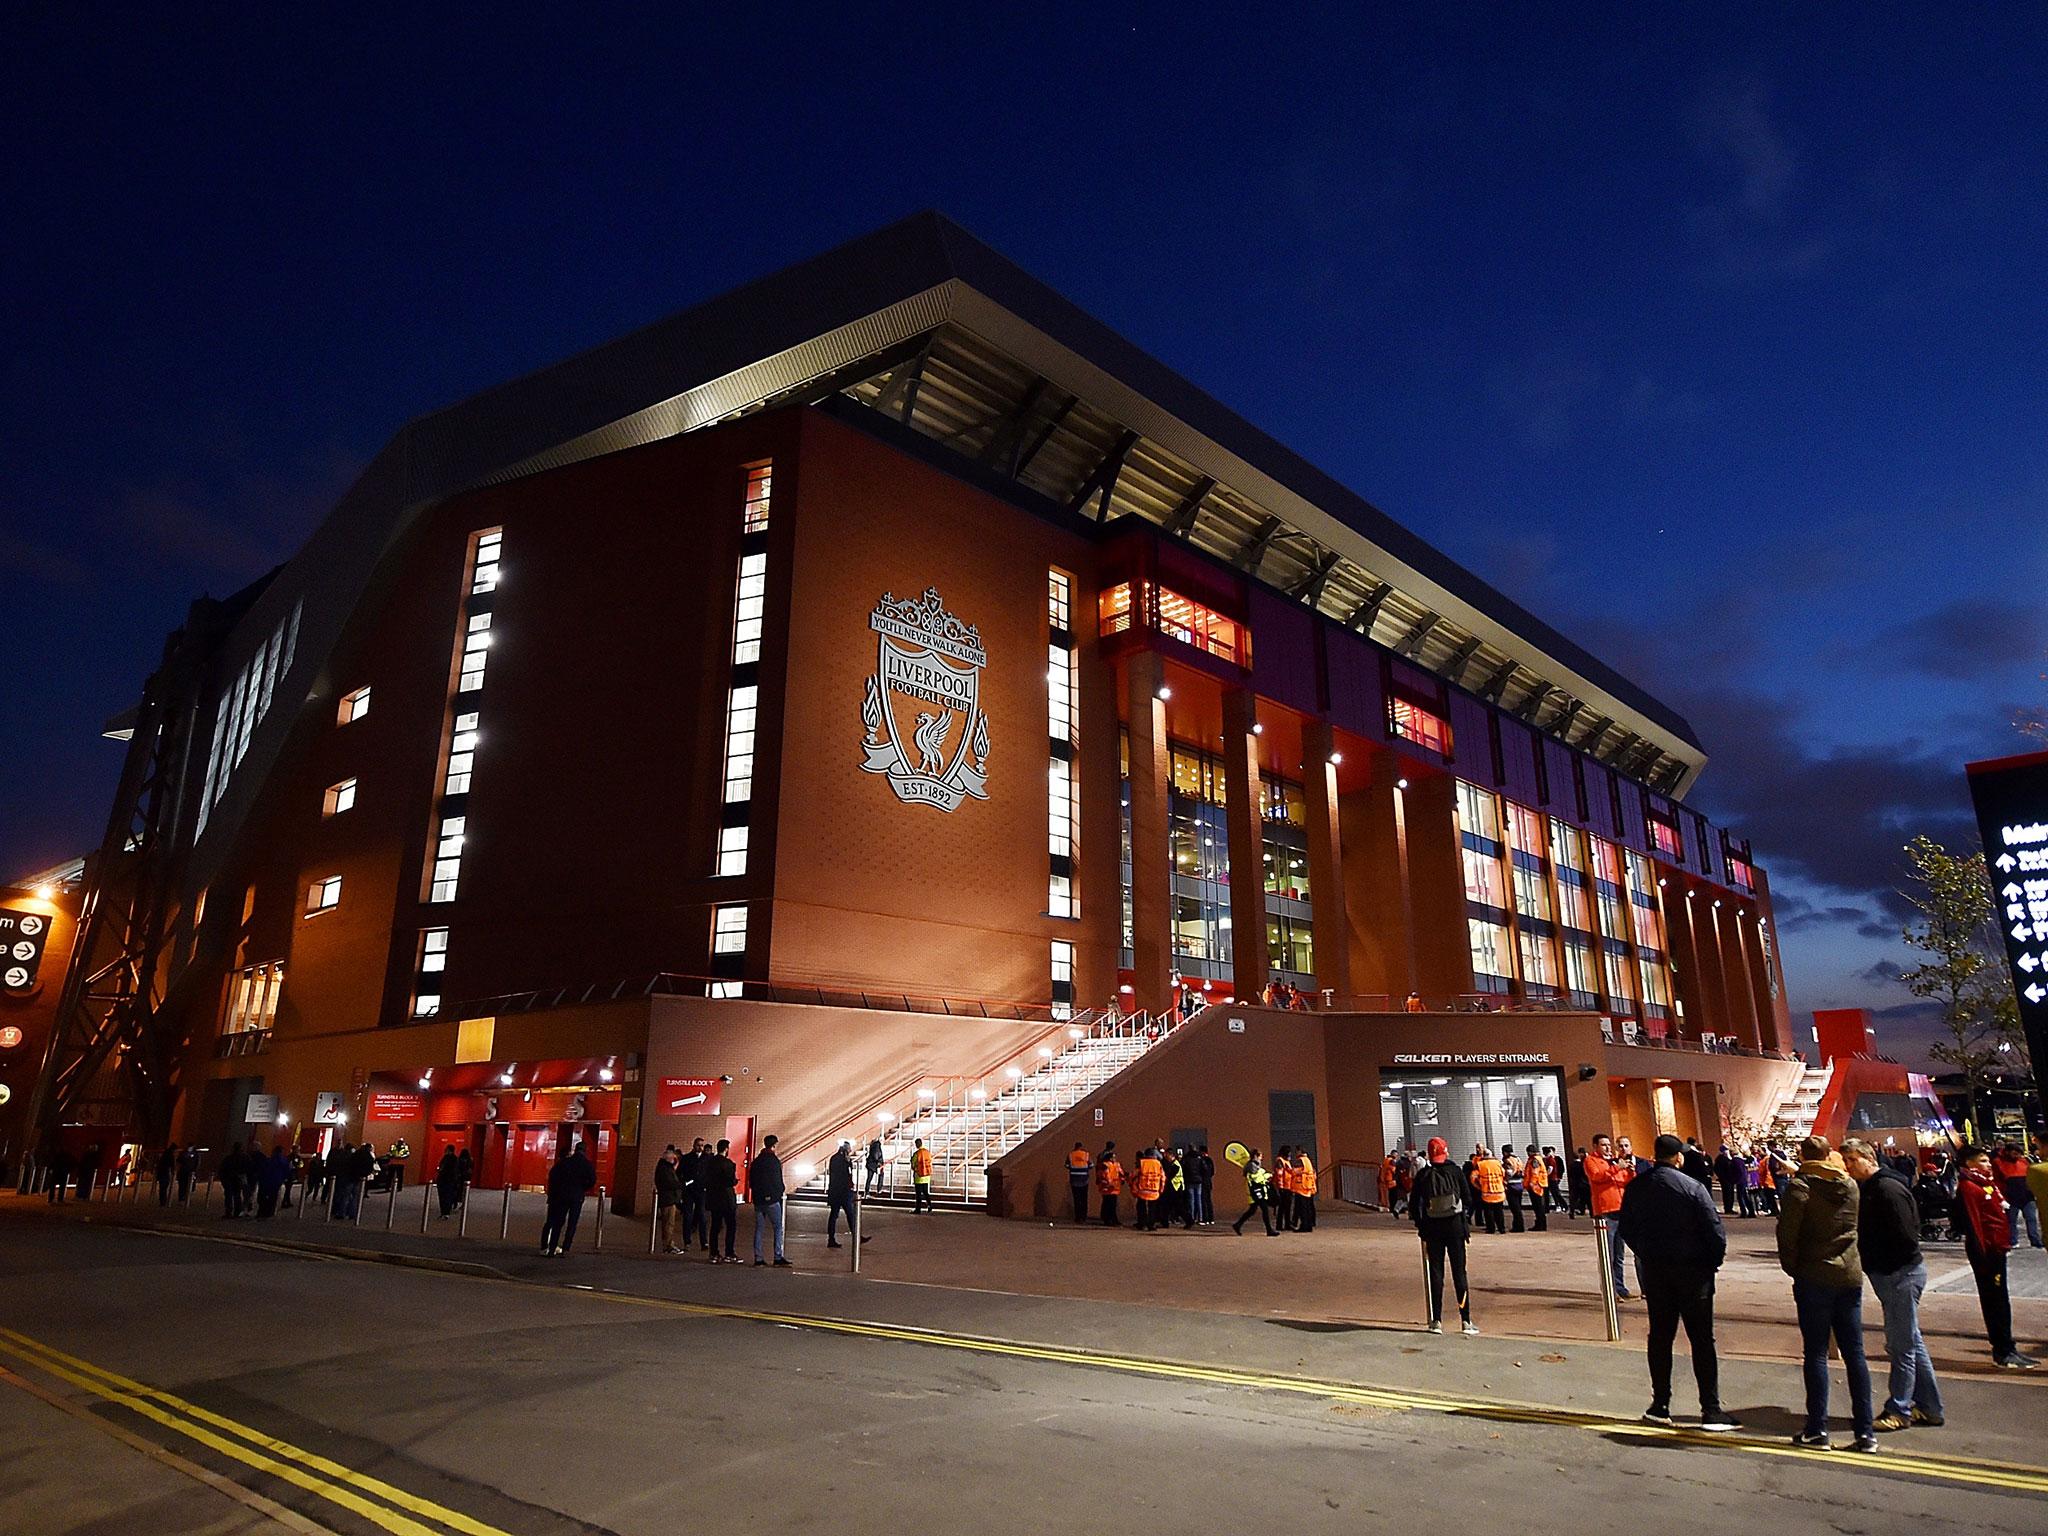 As of June 2018, Liverpool’s employees can expect to be paid £8.45 per hour